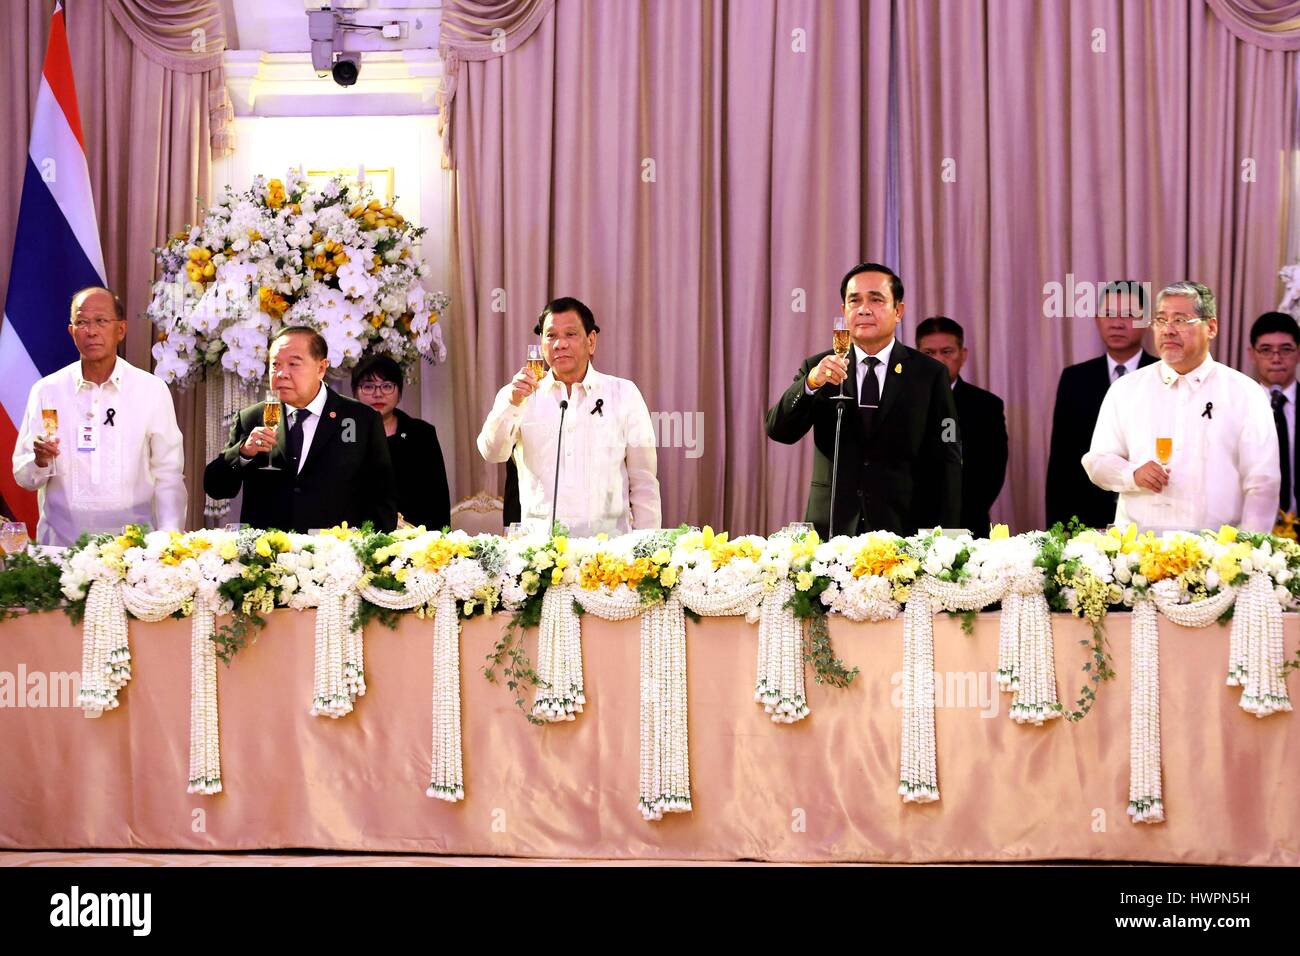 Philippine President Rodrigo Duterte, center, holds his glass in a toast with Thai Prime Minister General Prayut Chan-o-cha during the state dinner at the Government House March 21, 2017 in Bangkok, Thailand. Duterte is in Thailand on a two-day visit. Credit: Planetpix/Alamy Live News Stock Photo